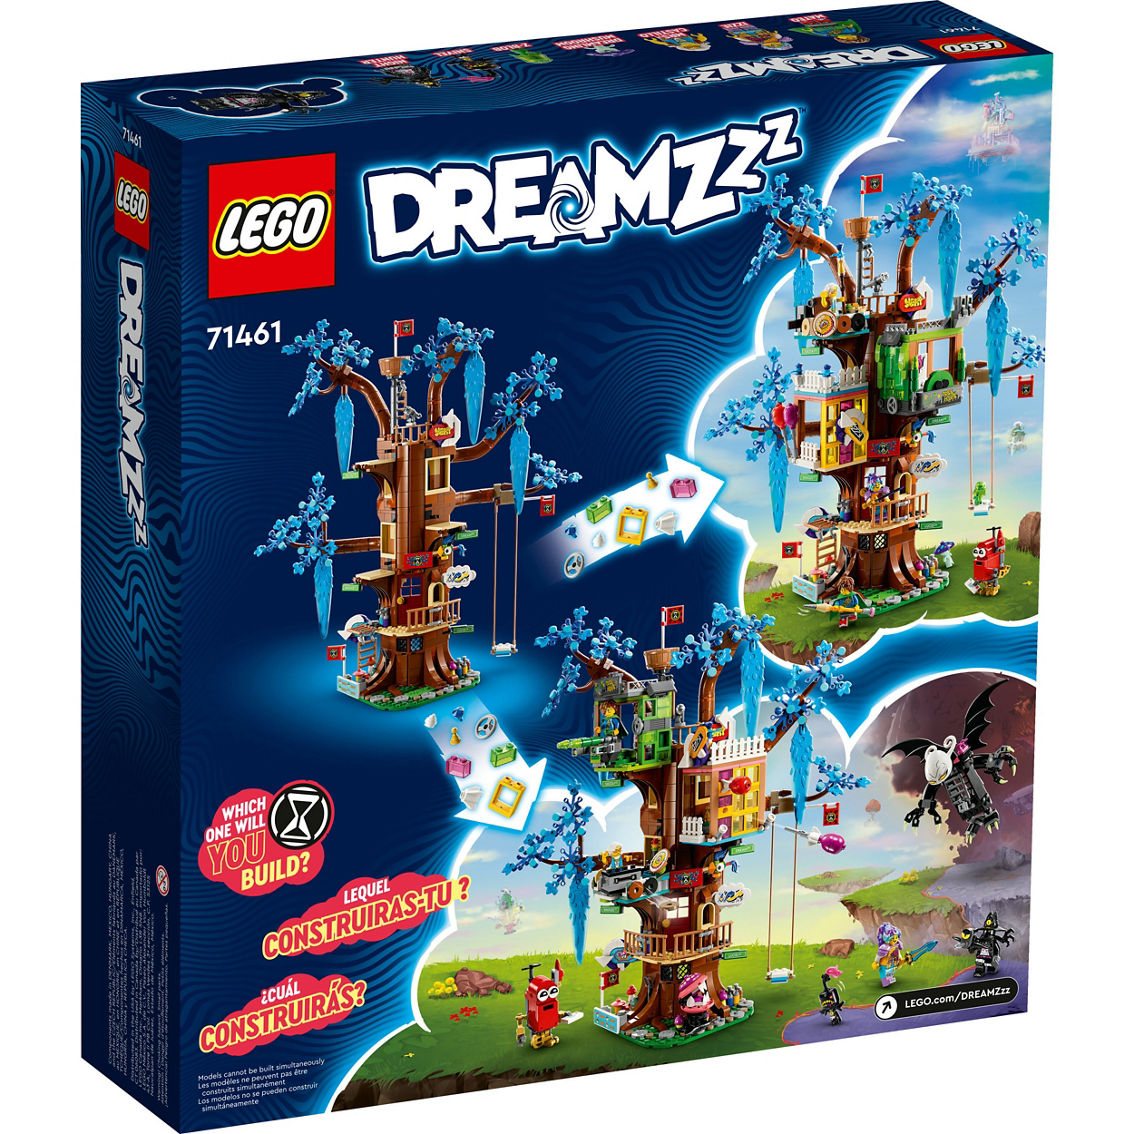 Lego Dreamz Fantastical Tree House Imaginative Play Building Toy 71461, Building Toys, Baby & Toys